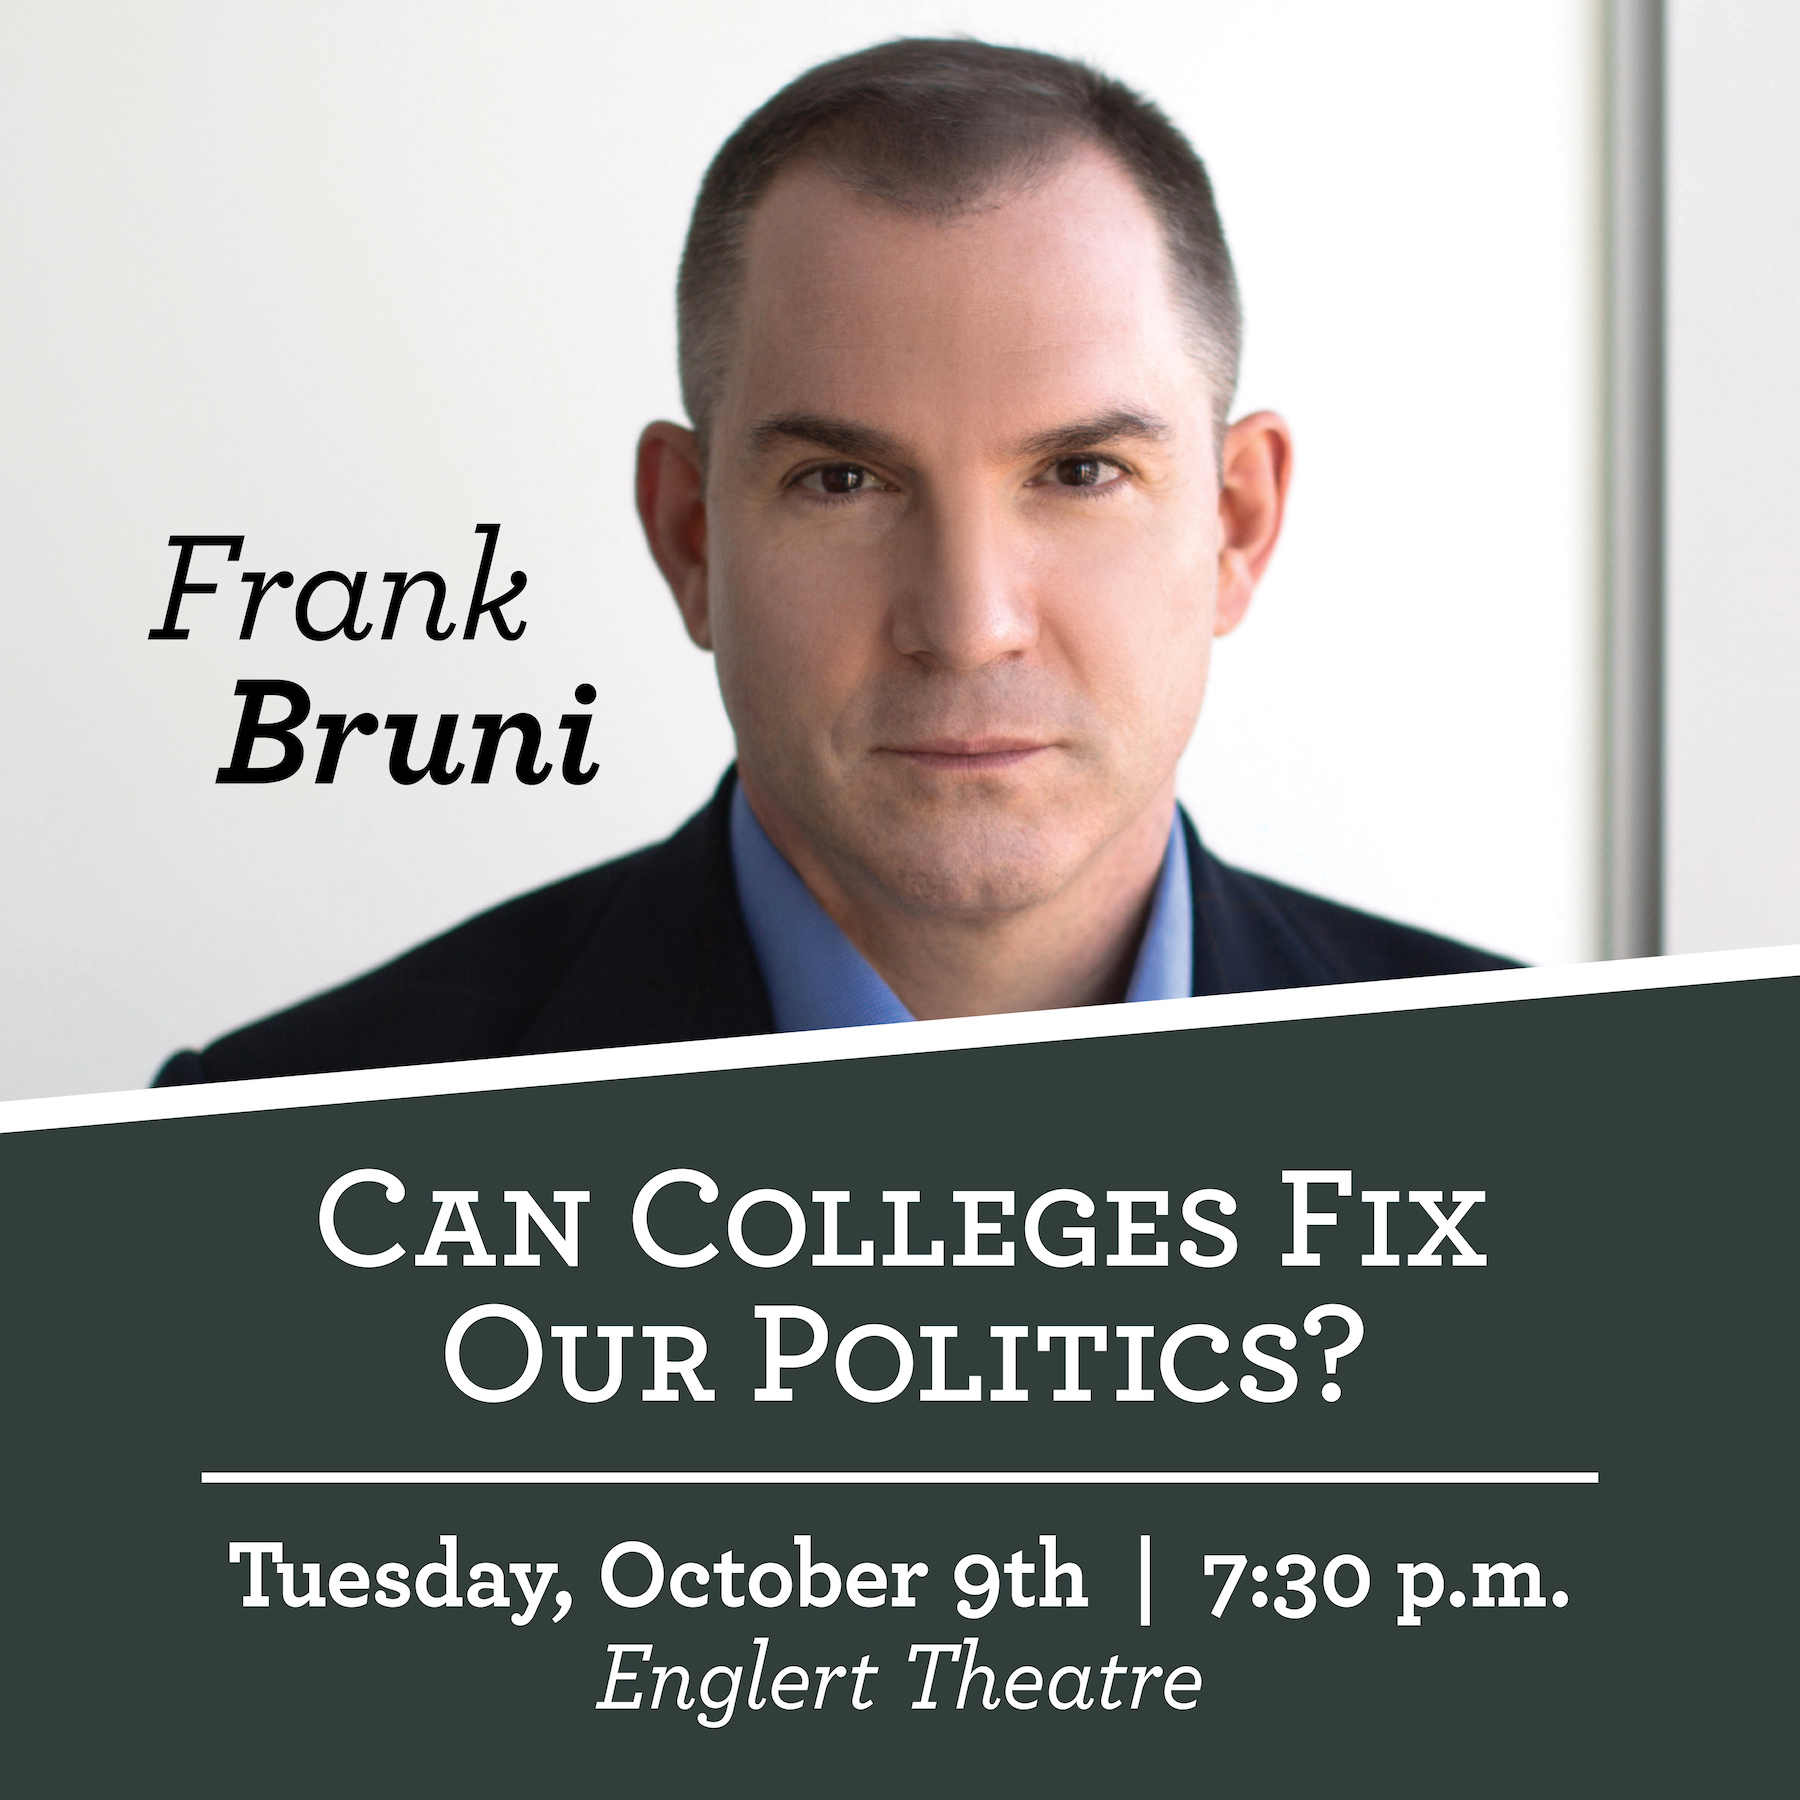 Lecture Committee Presents Frank Bruni promotional image